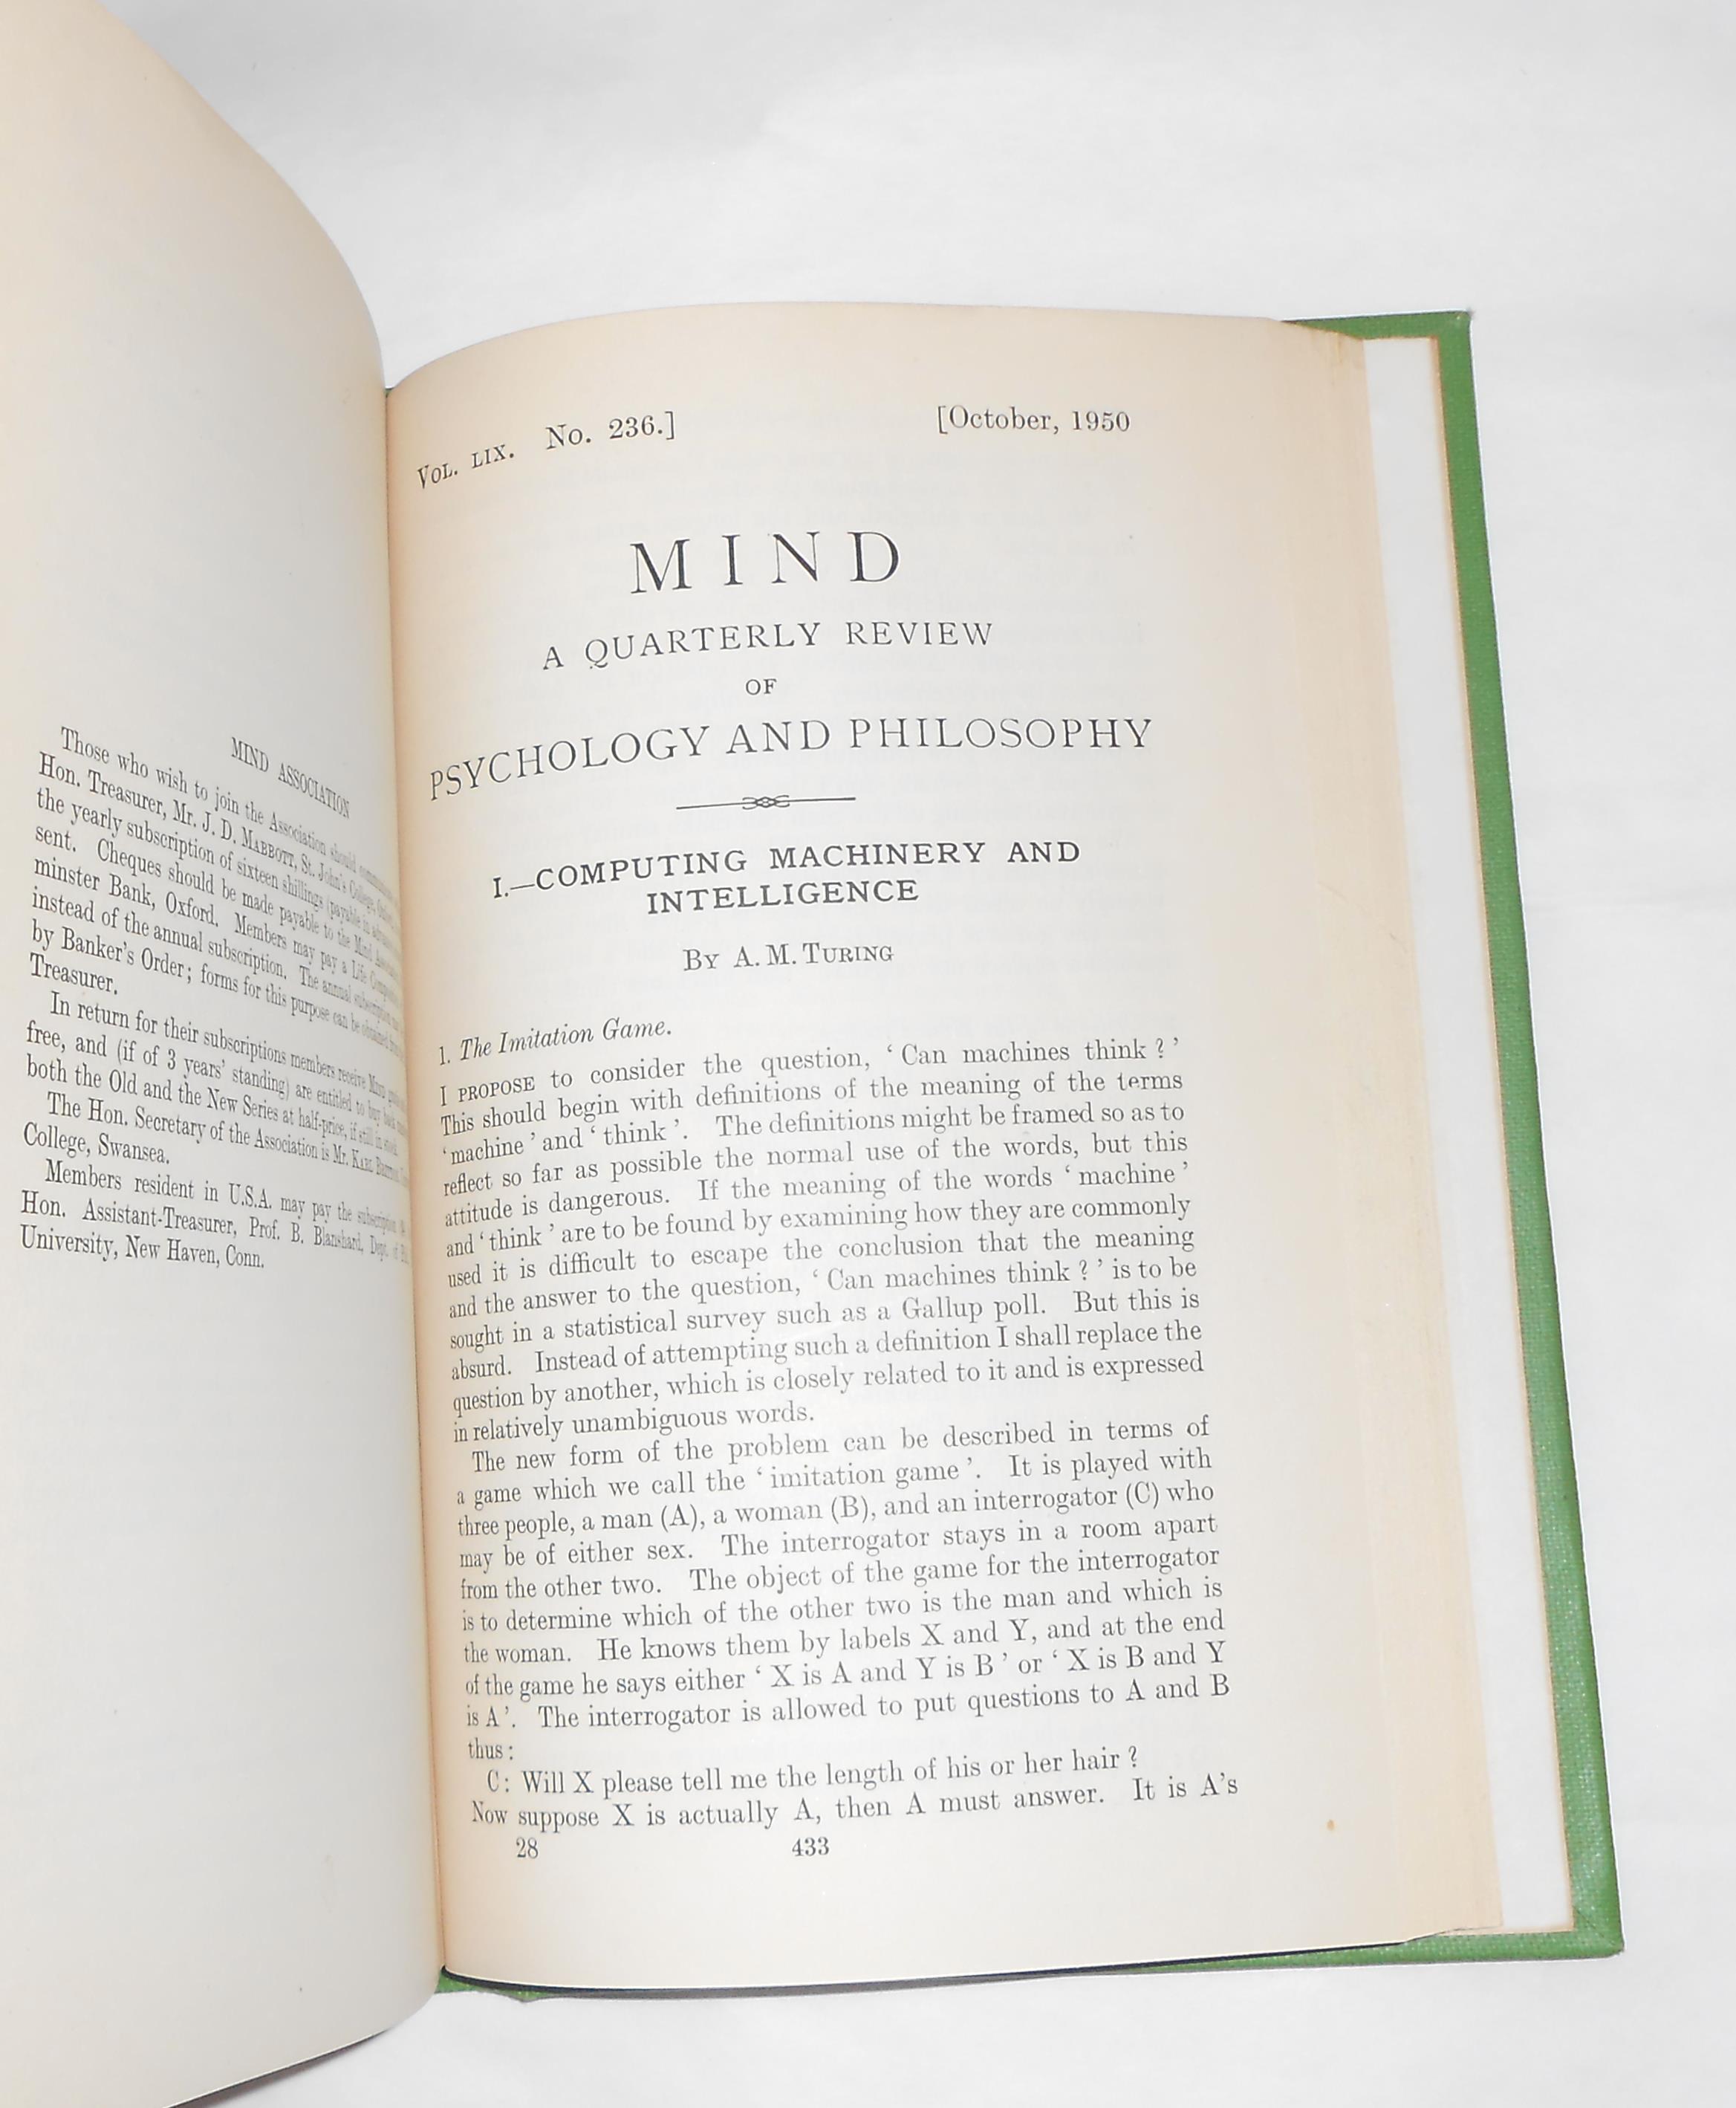 Orthodox salade Bruin Computing Machinery and Intelligence by Alan Turing - first printing in  Mind - A Quarterly Review of Psychology and Philosophy - Vol LIX 1950 by  TURING, Alan (A M) (volume editor Gilbert